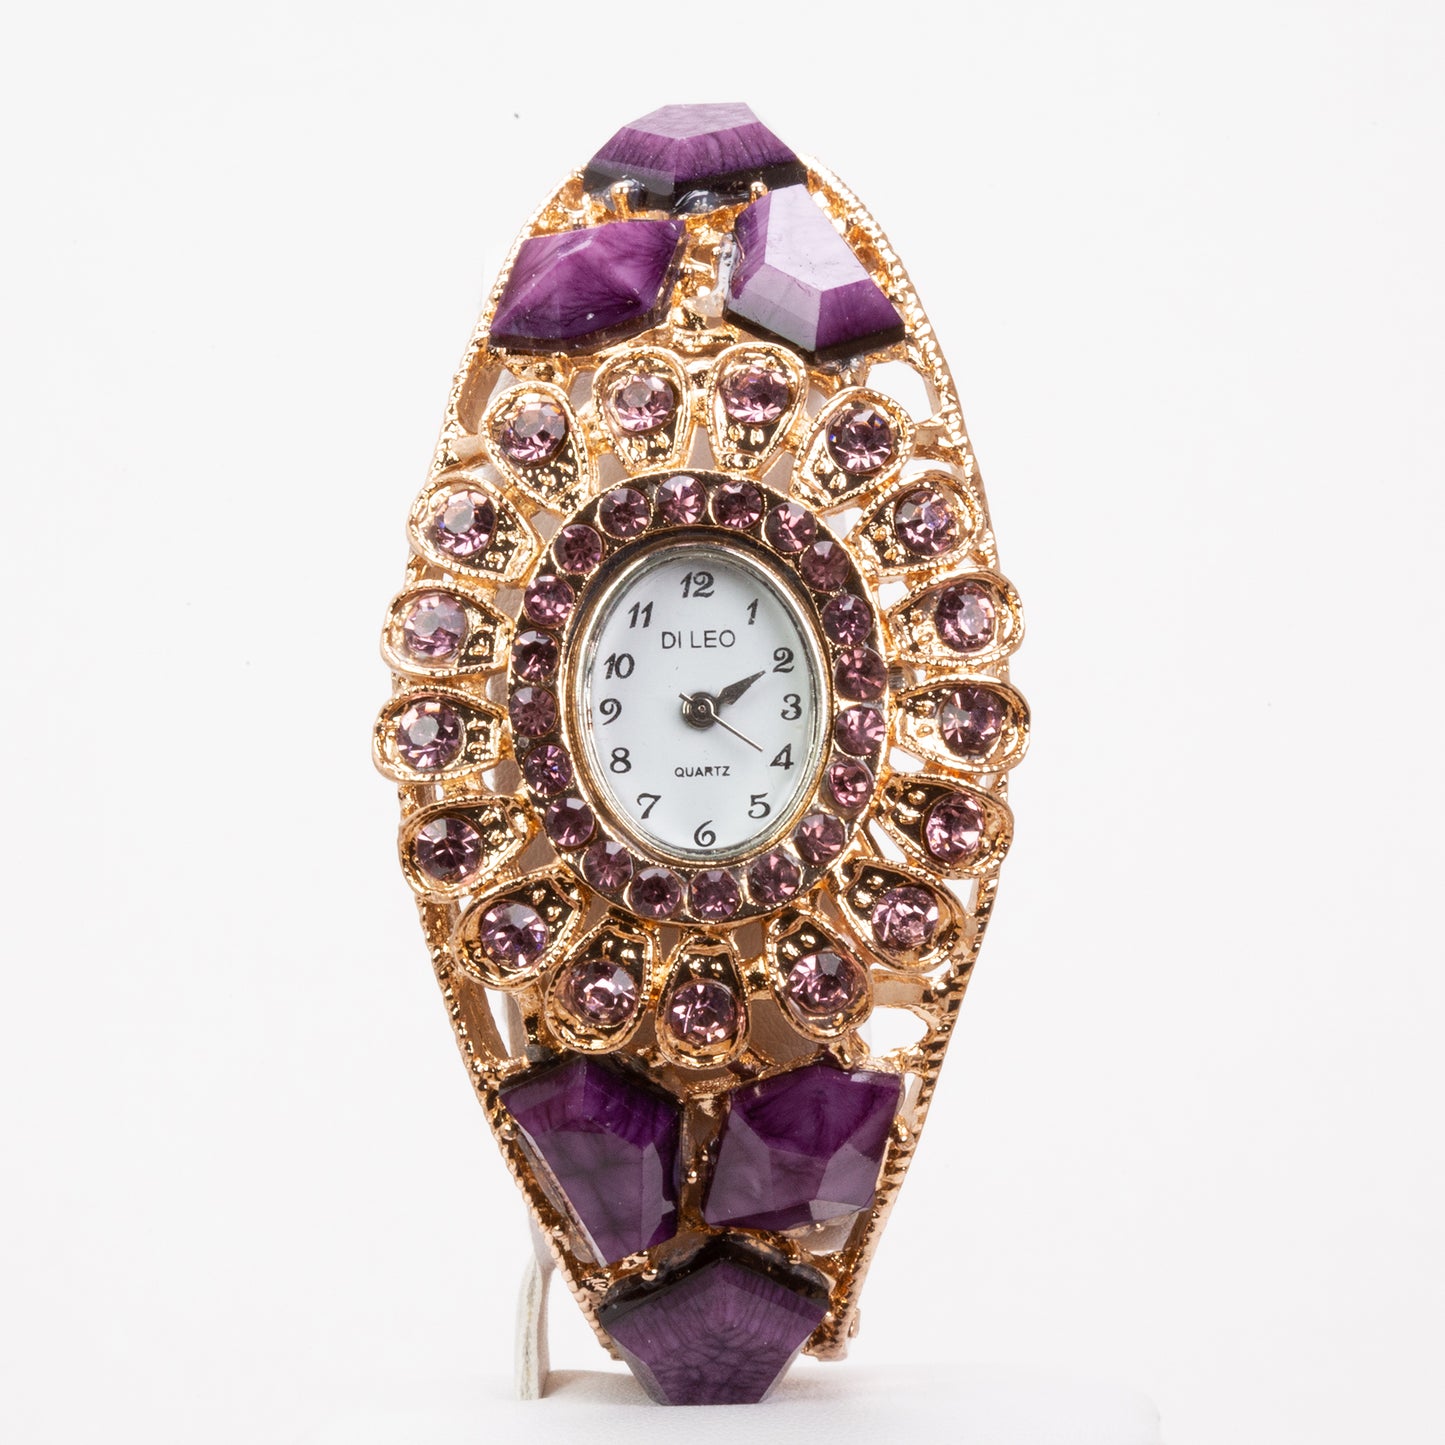 DiLeo Garda Queen-Purple and Gold Color Alloy Watch, Analog, for Women , 18 CM